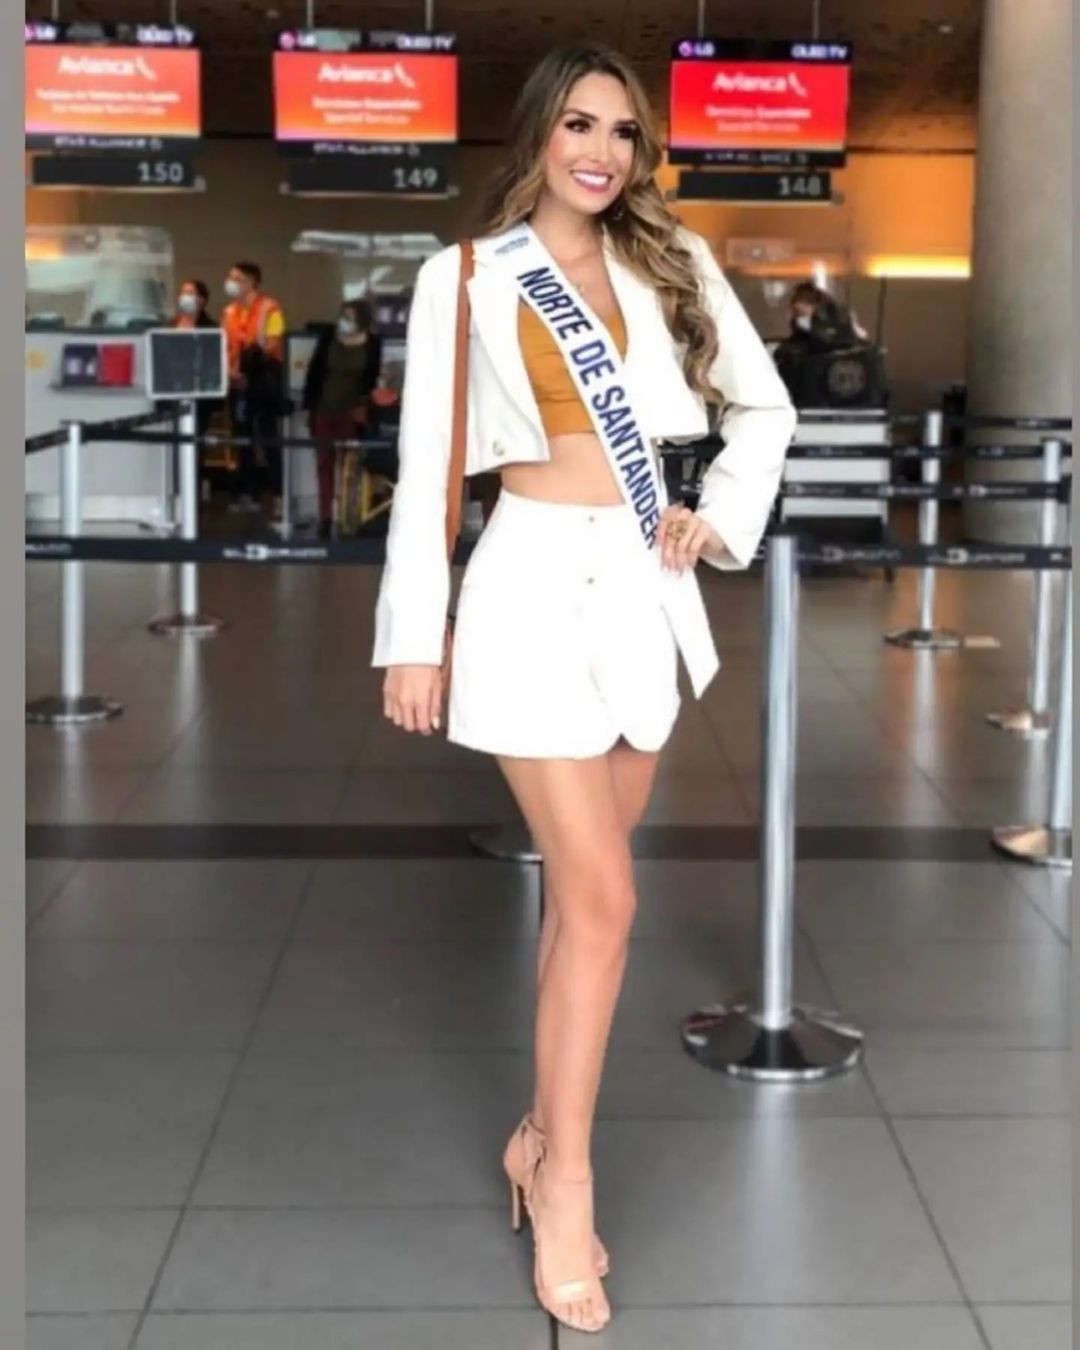 candidatas a miss universe colombia 2021. final: 18 oct. sede: neiva. - Página 4 52820G